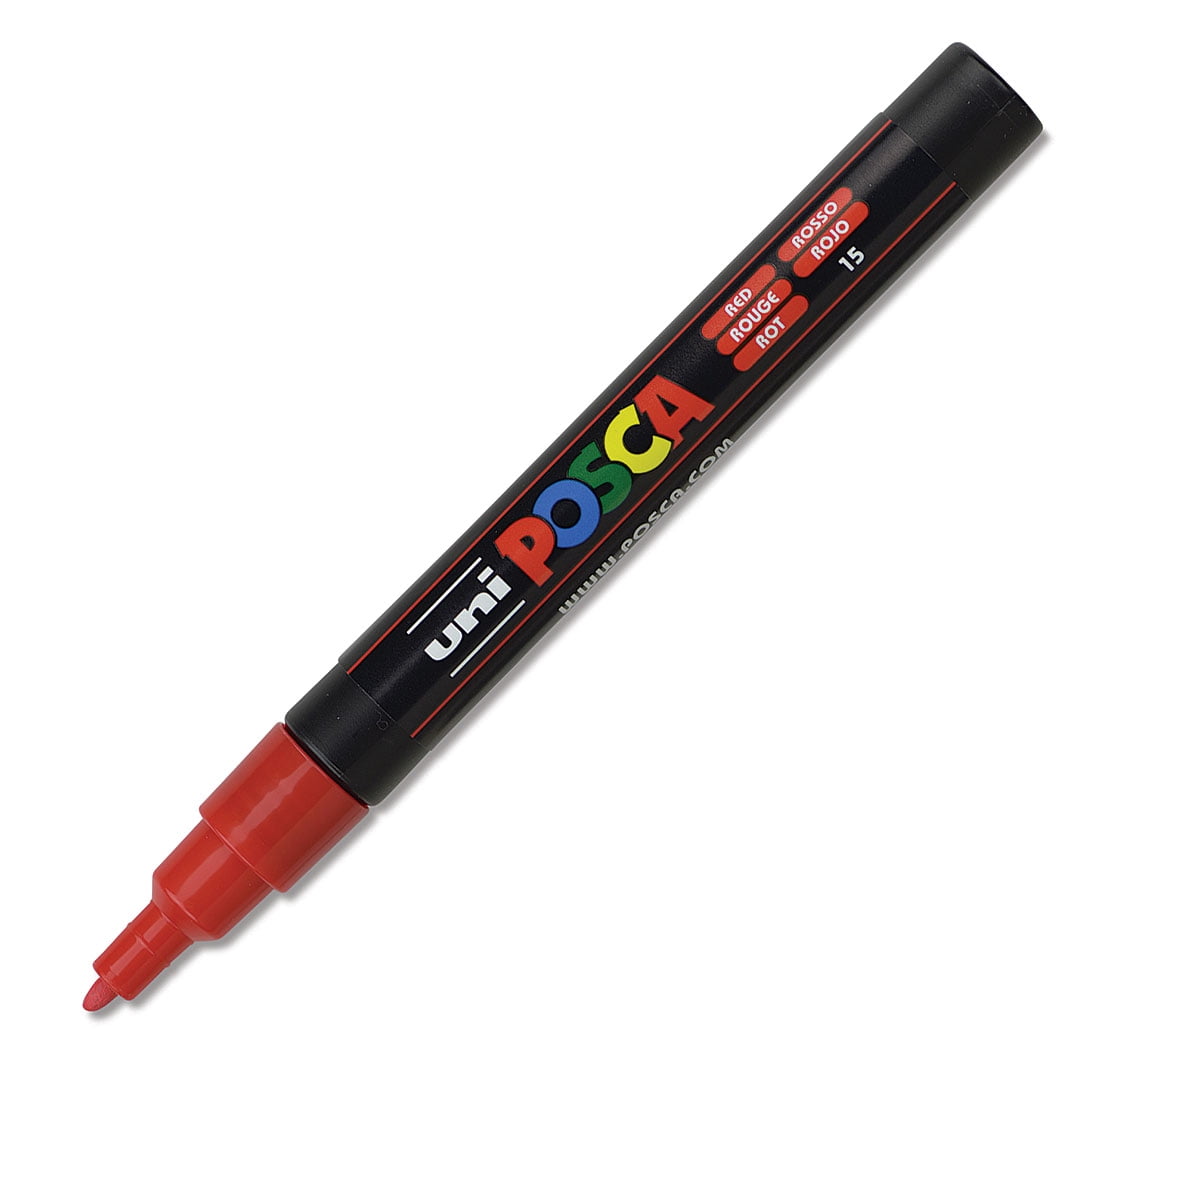 TOOLI-ART Acrylic Paint Pens Assorted Red Pro Color Series Markers for Rock Painting, Glass, Mugs, Wood, Metal, Canvas with 0.7mm Extra Fine Tip